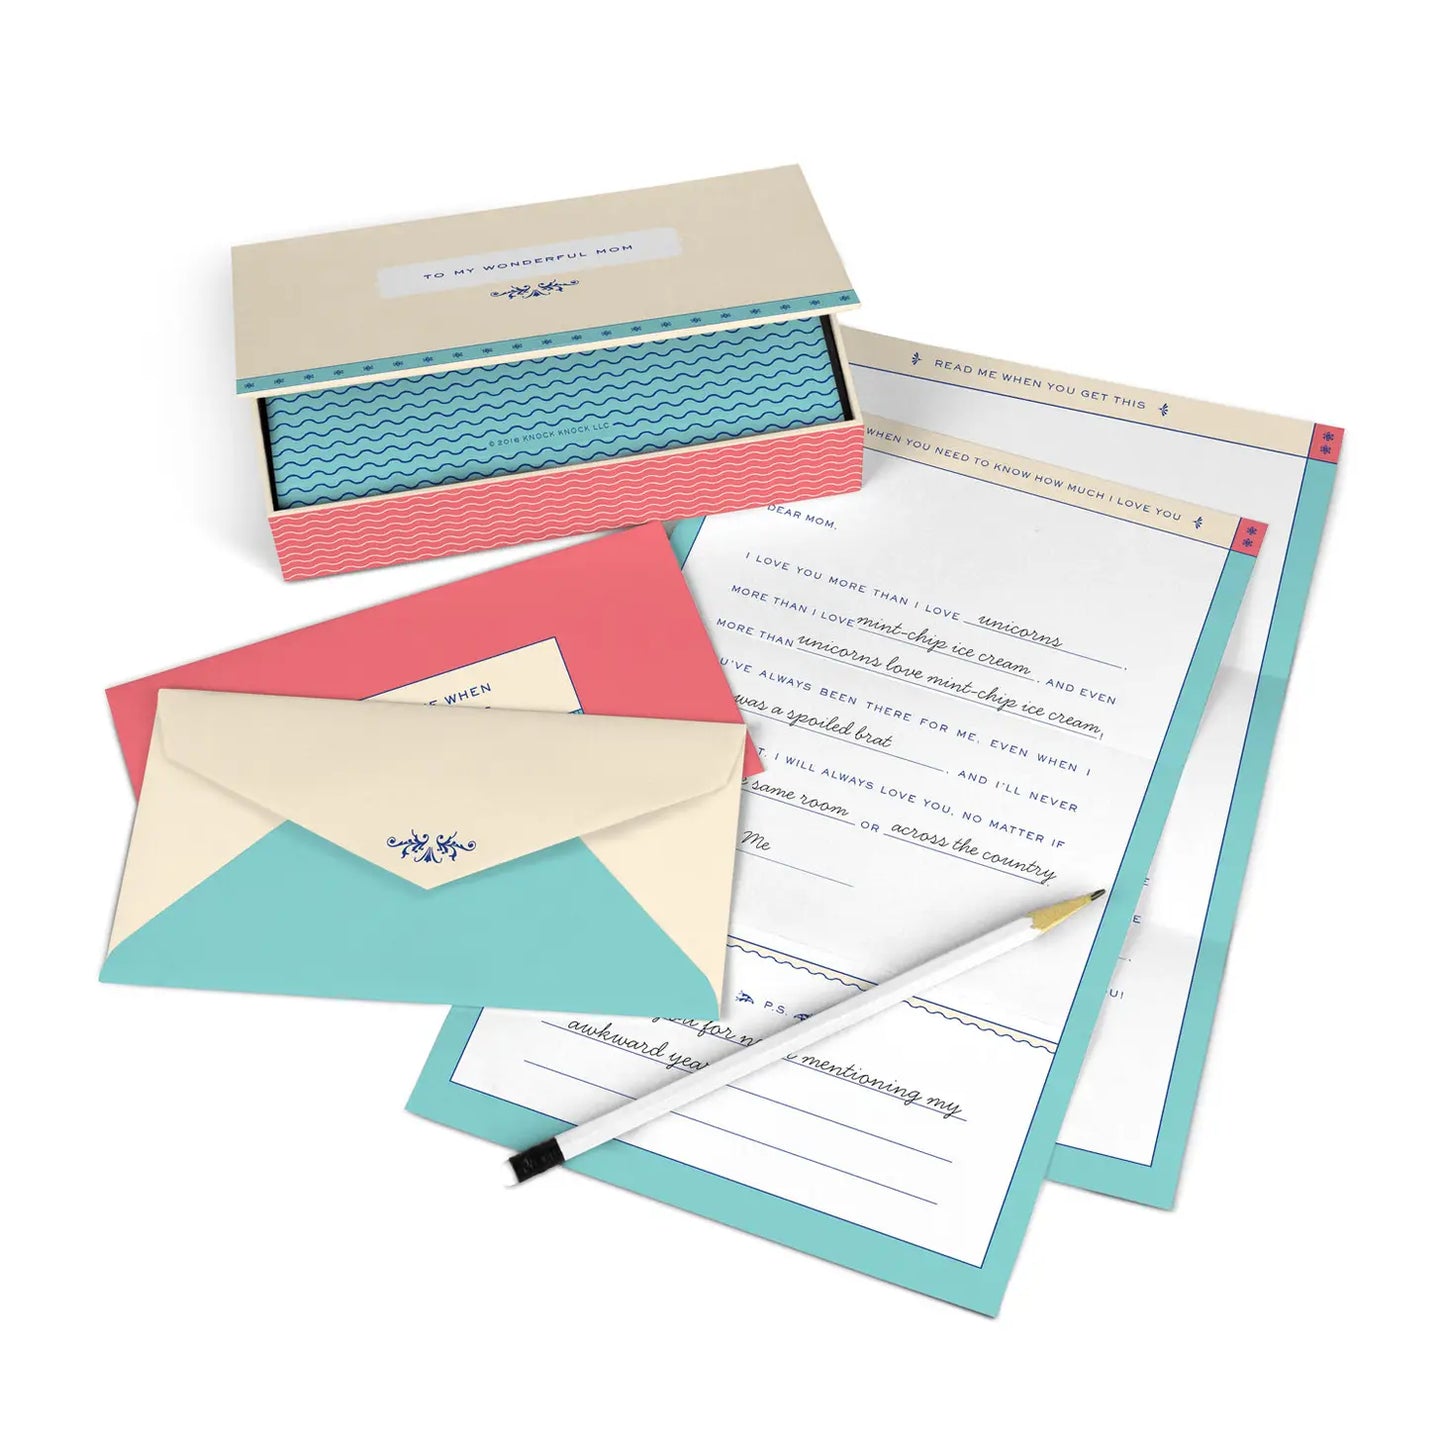 Letters To My Wonderful Mom; Read Me When Box Set - 9 Cards Included